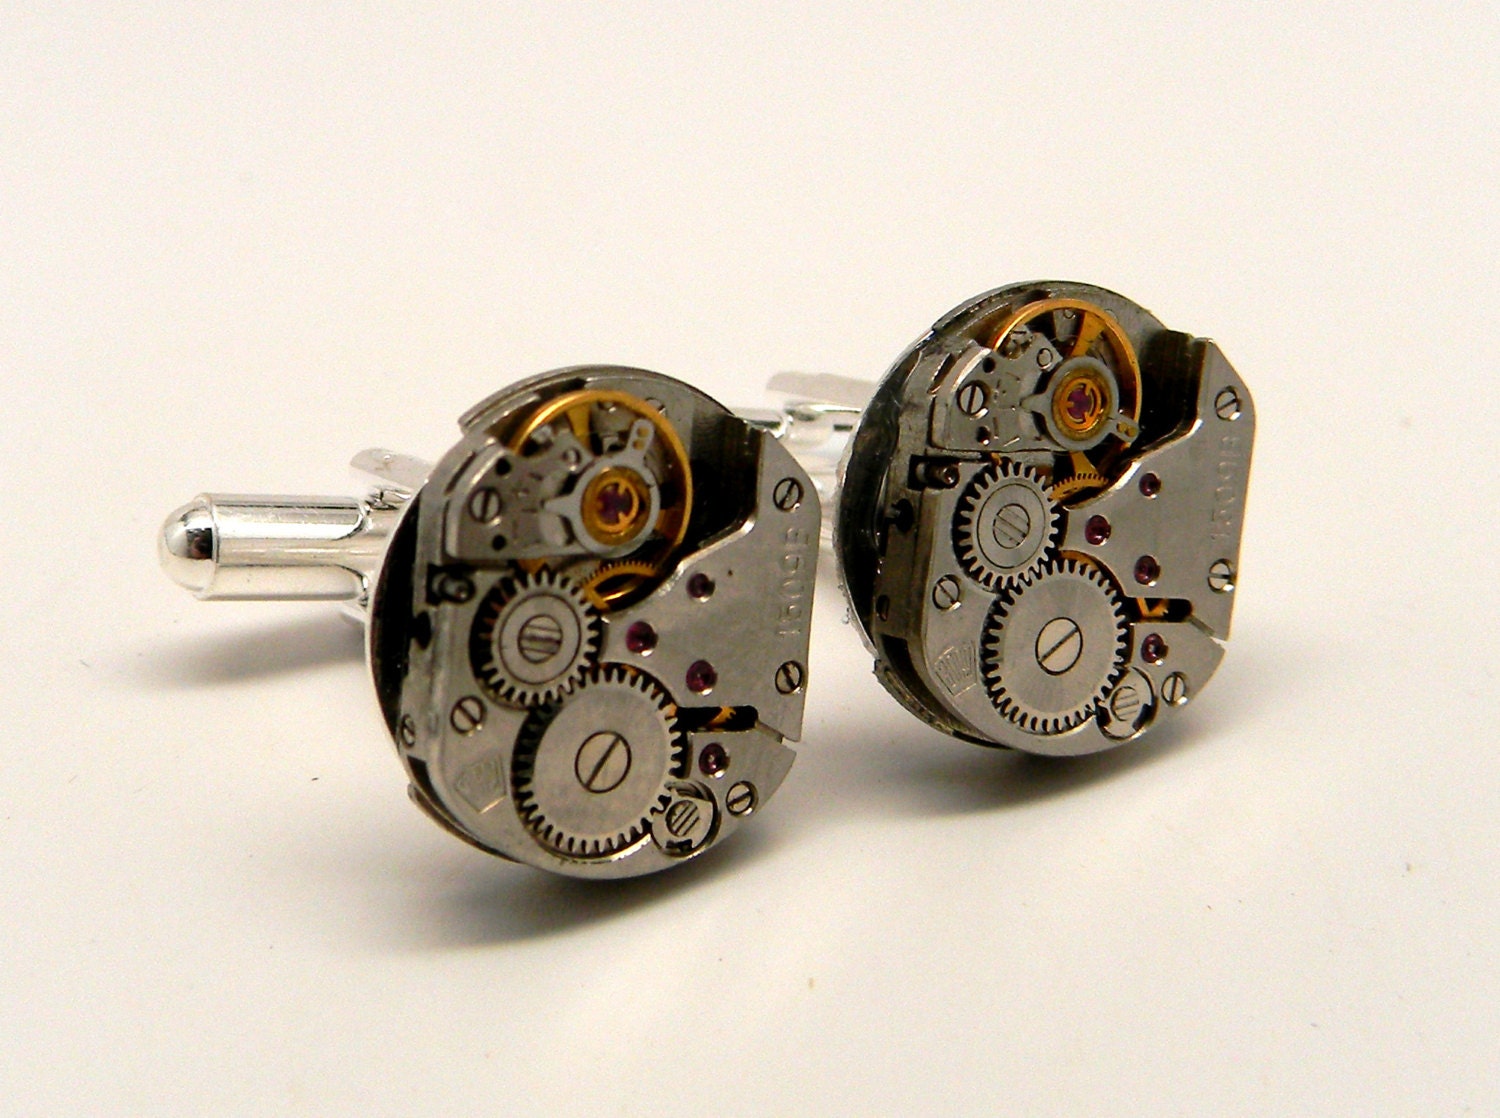 Steampunk cuff links with vintage watch movement.